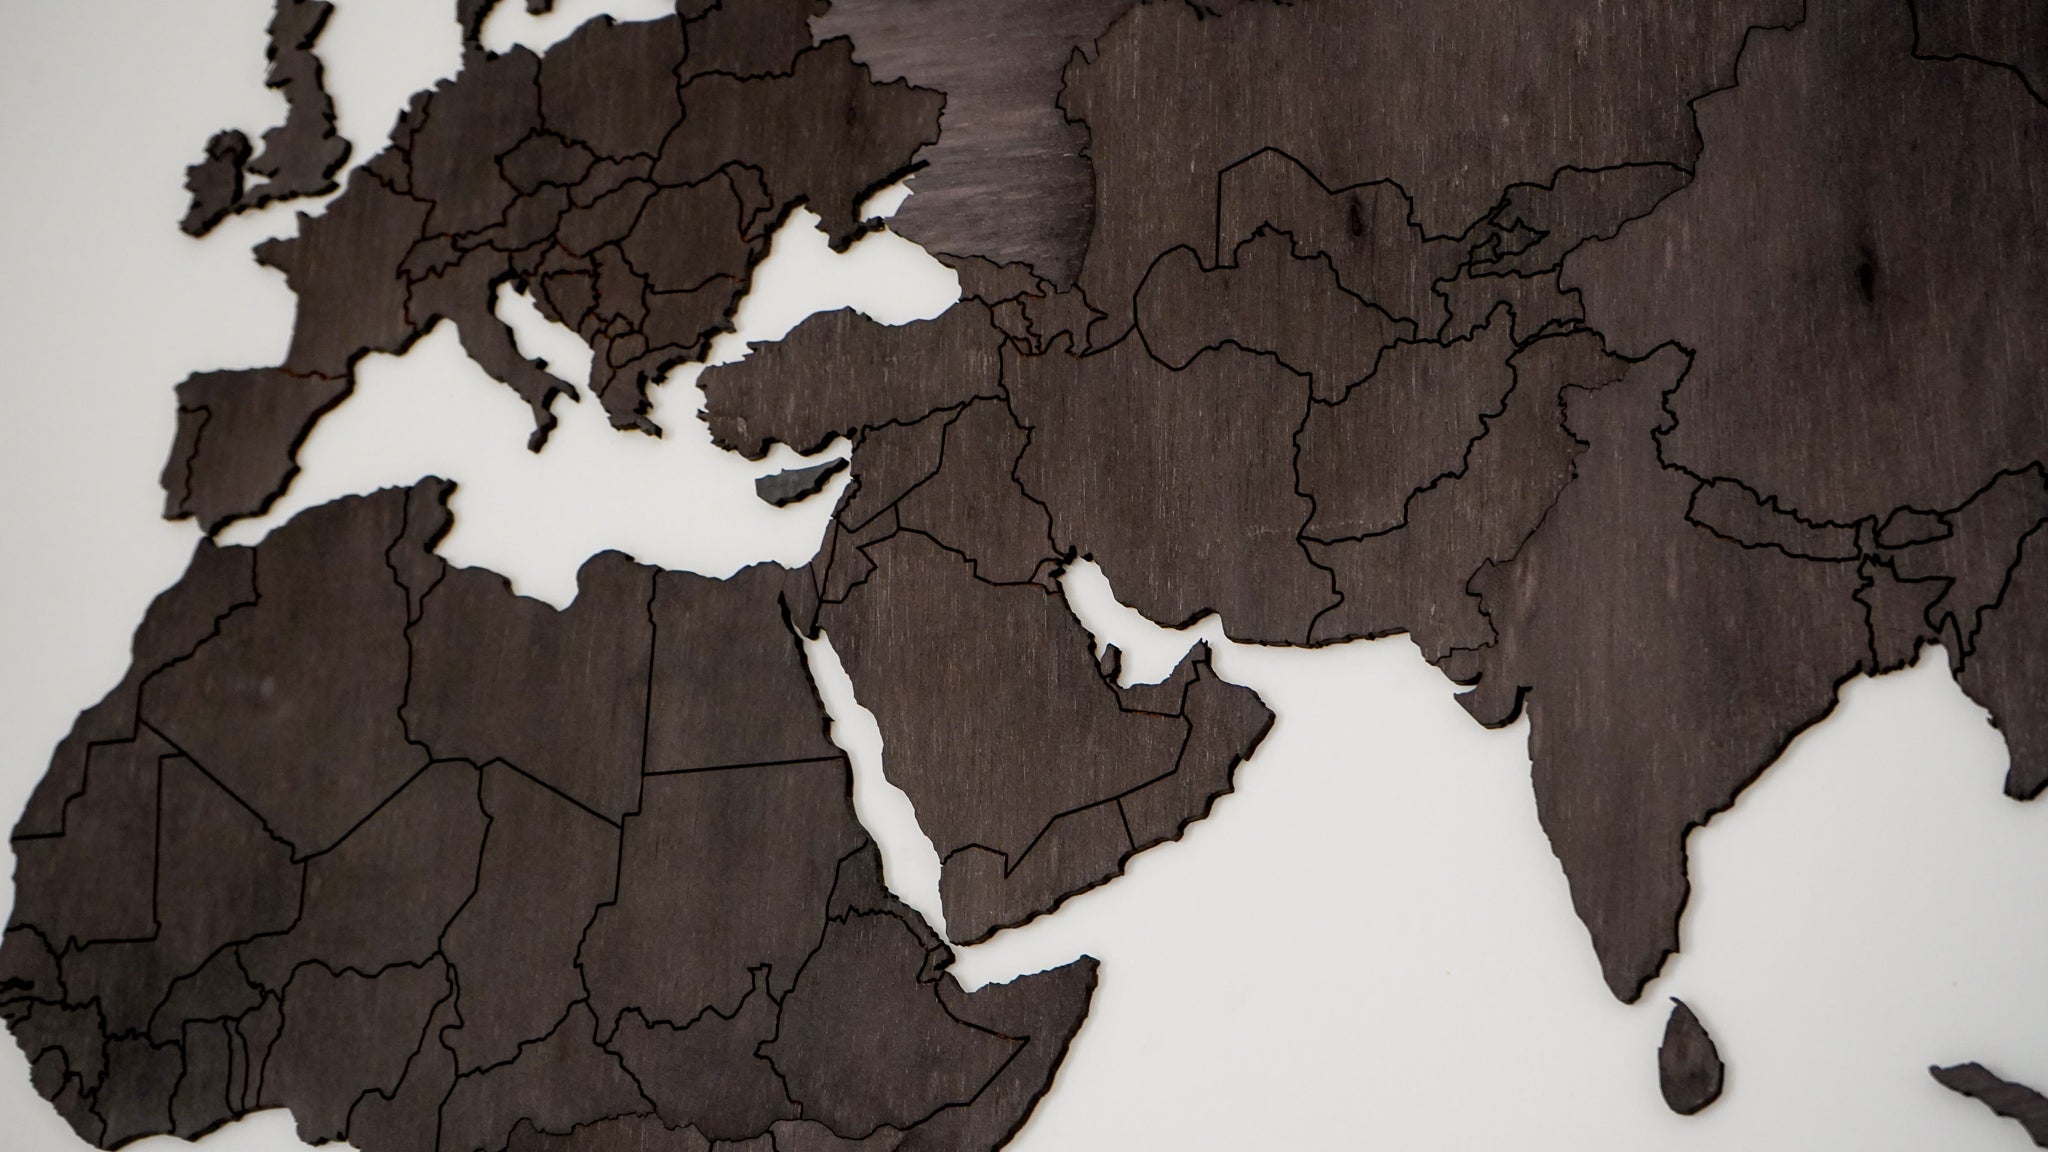 Wooden World Map with Borders